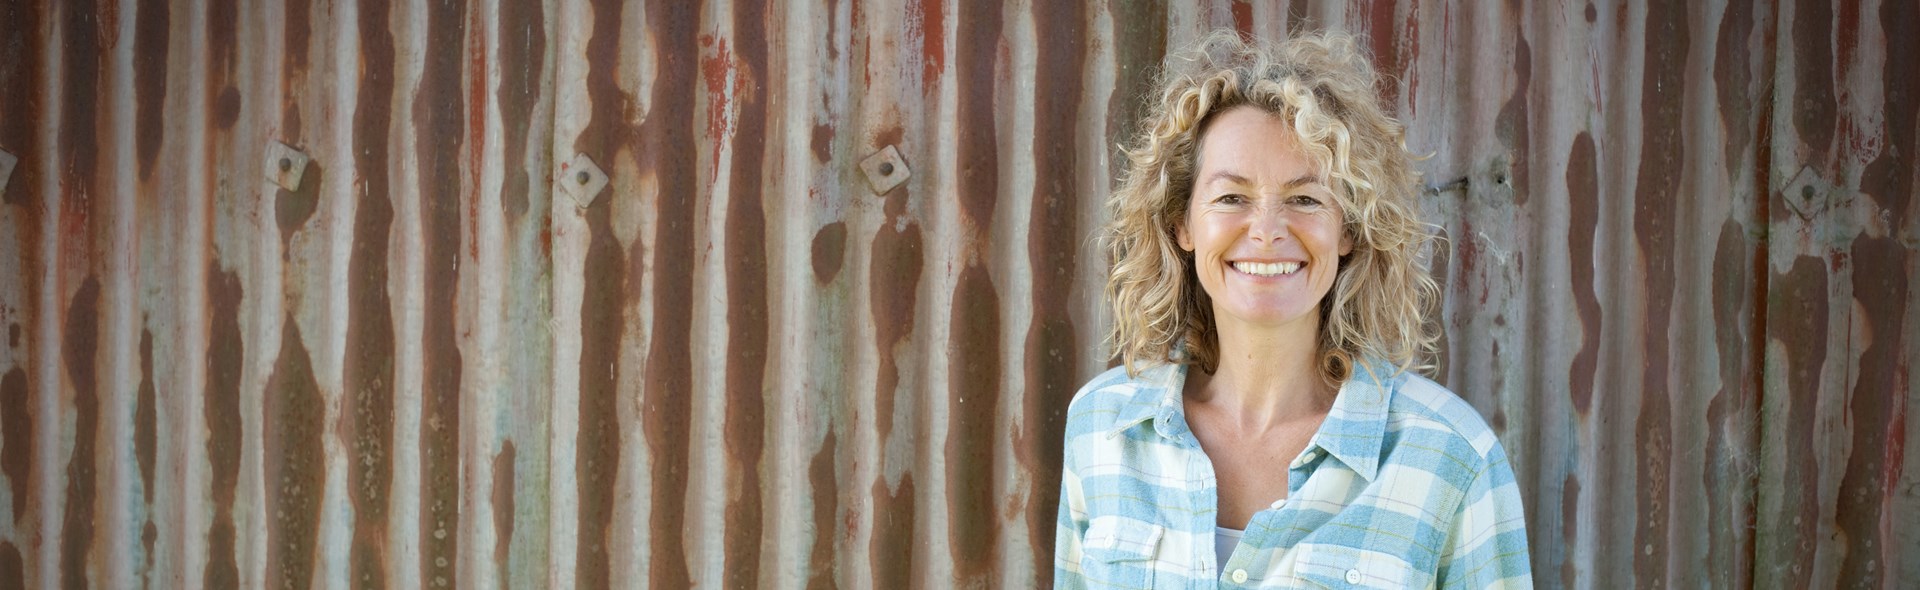 An Evening with Kate Humble - Humble by Nature